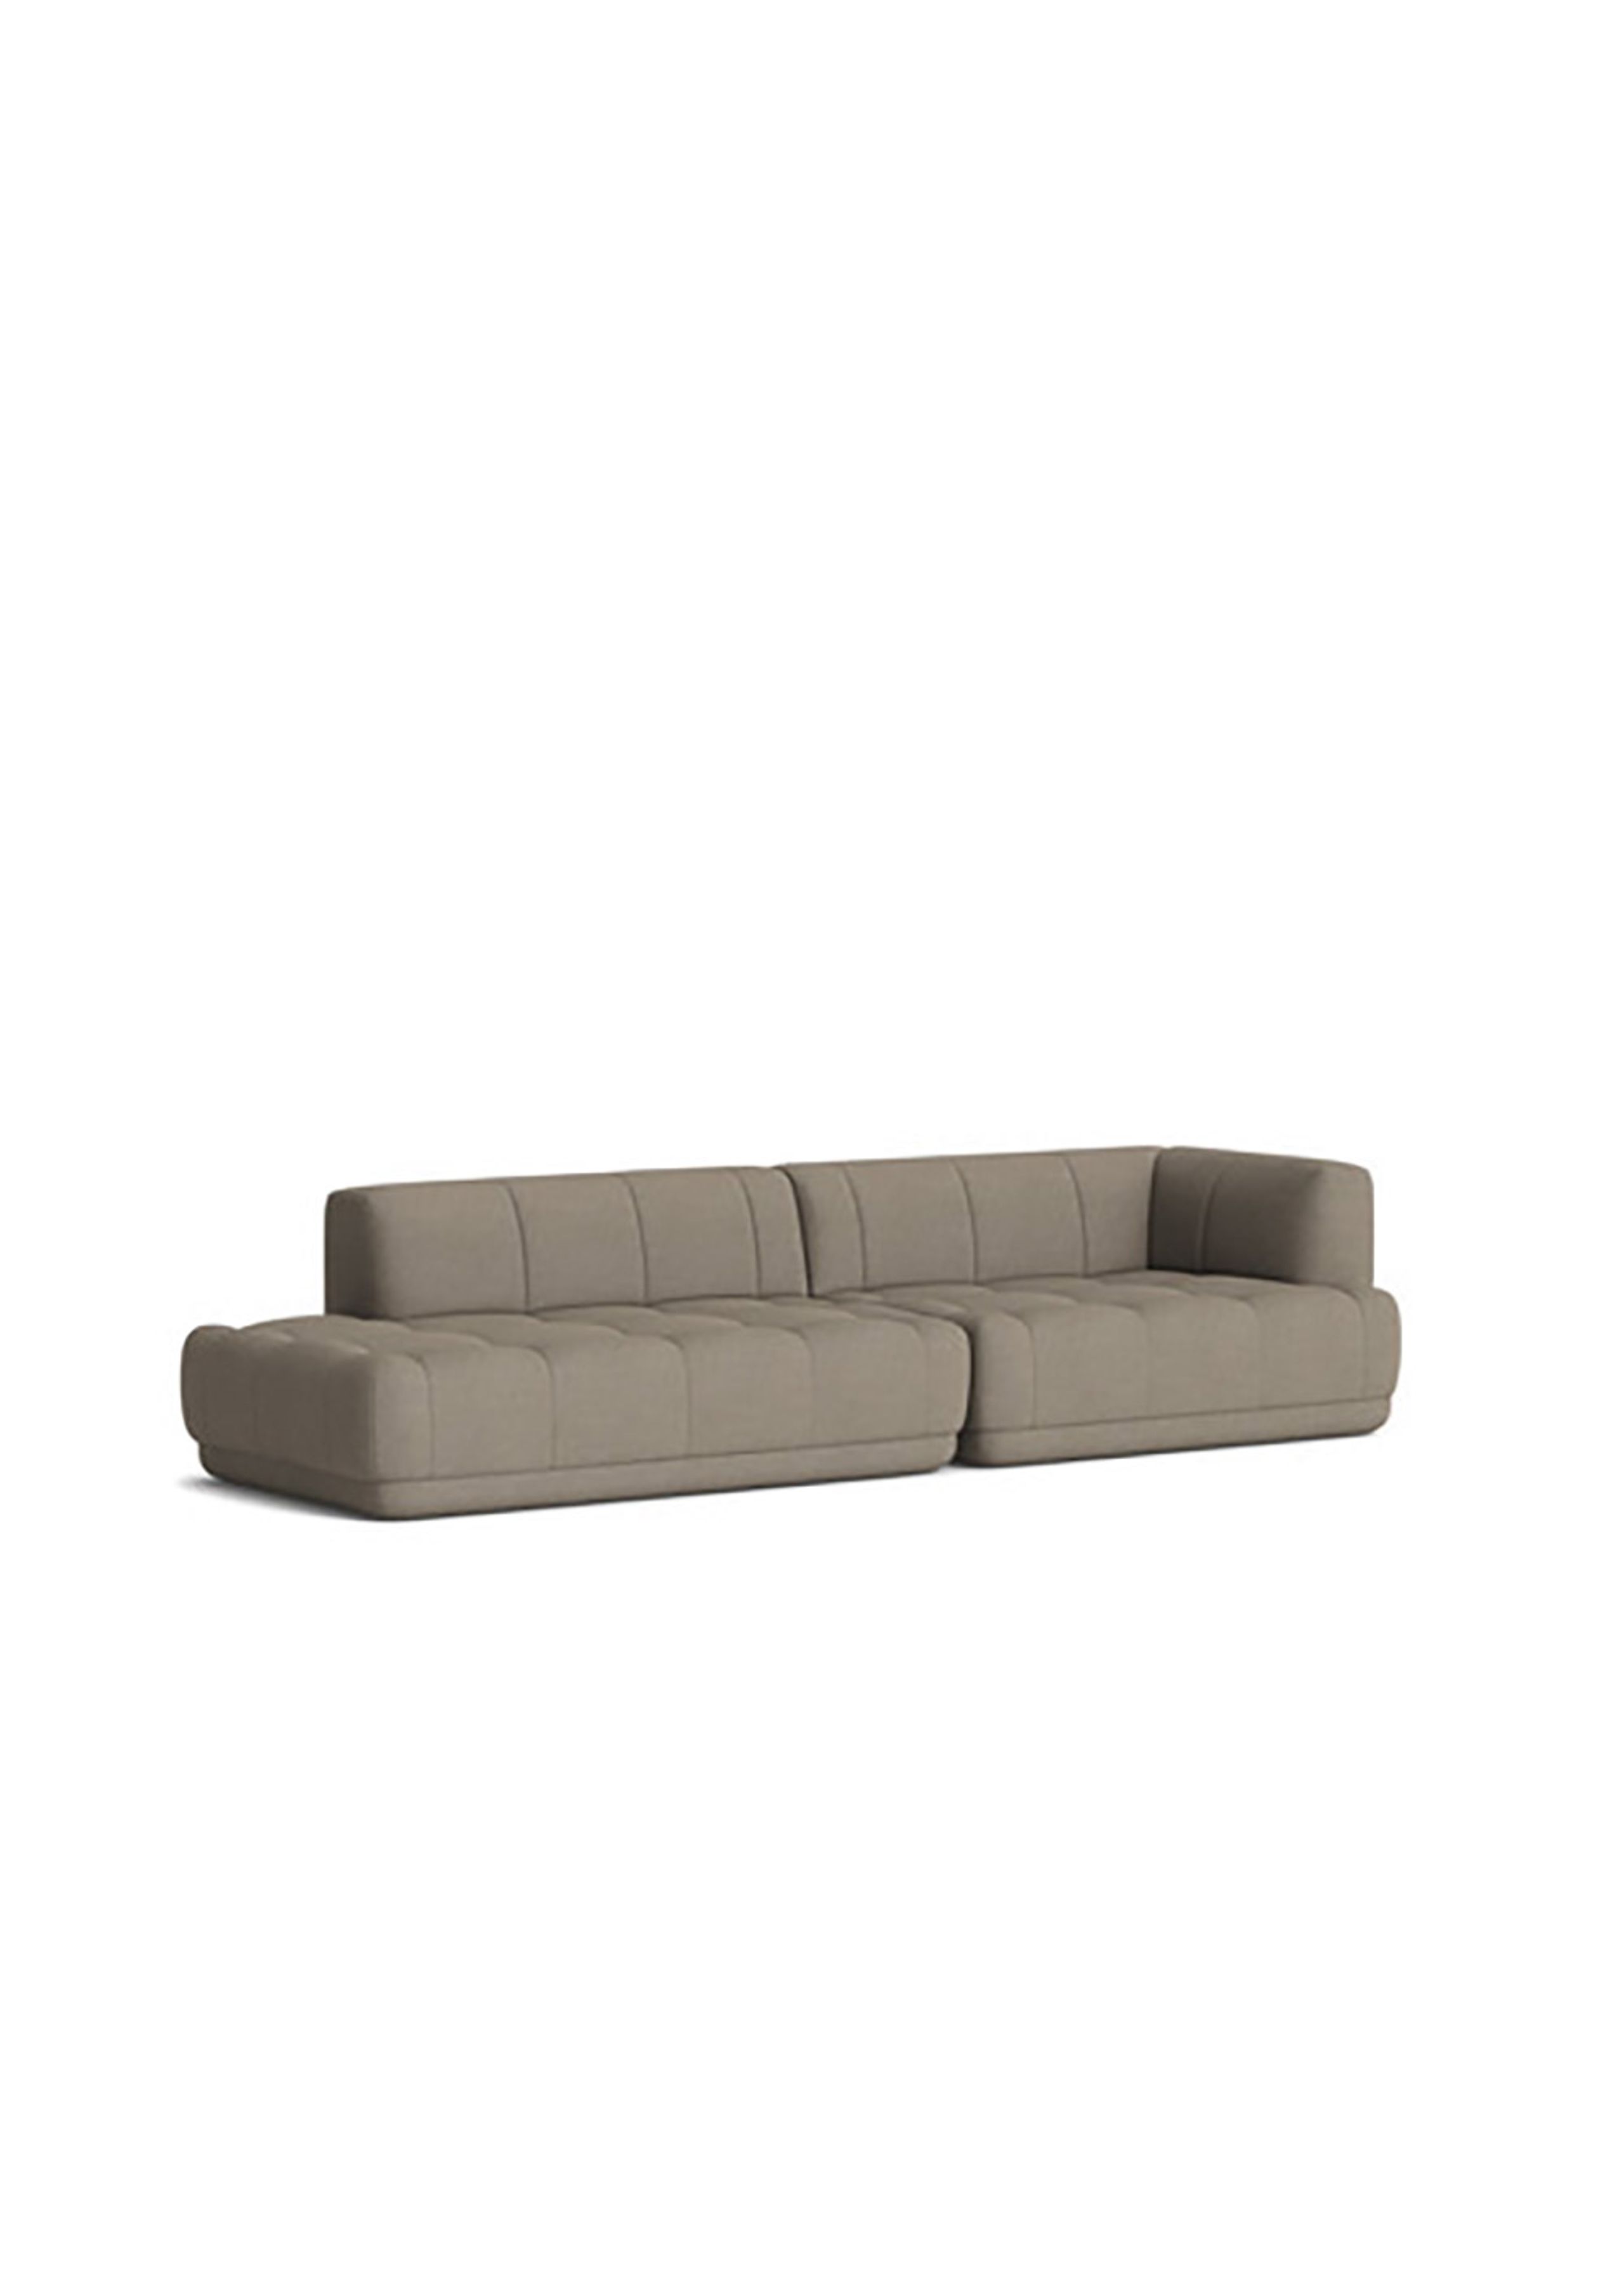 HAY - Sofa - Quilton Collection / Combination 10 - Remix 233